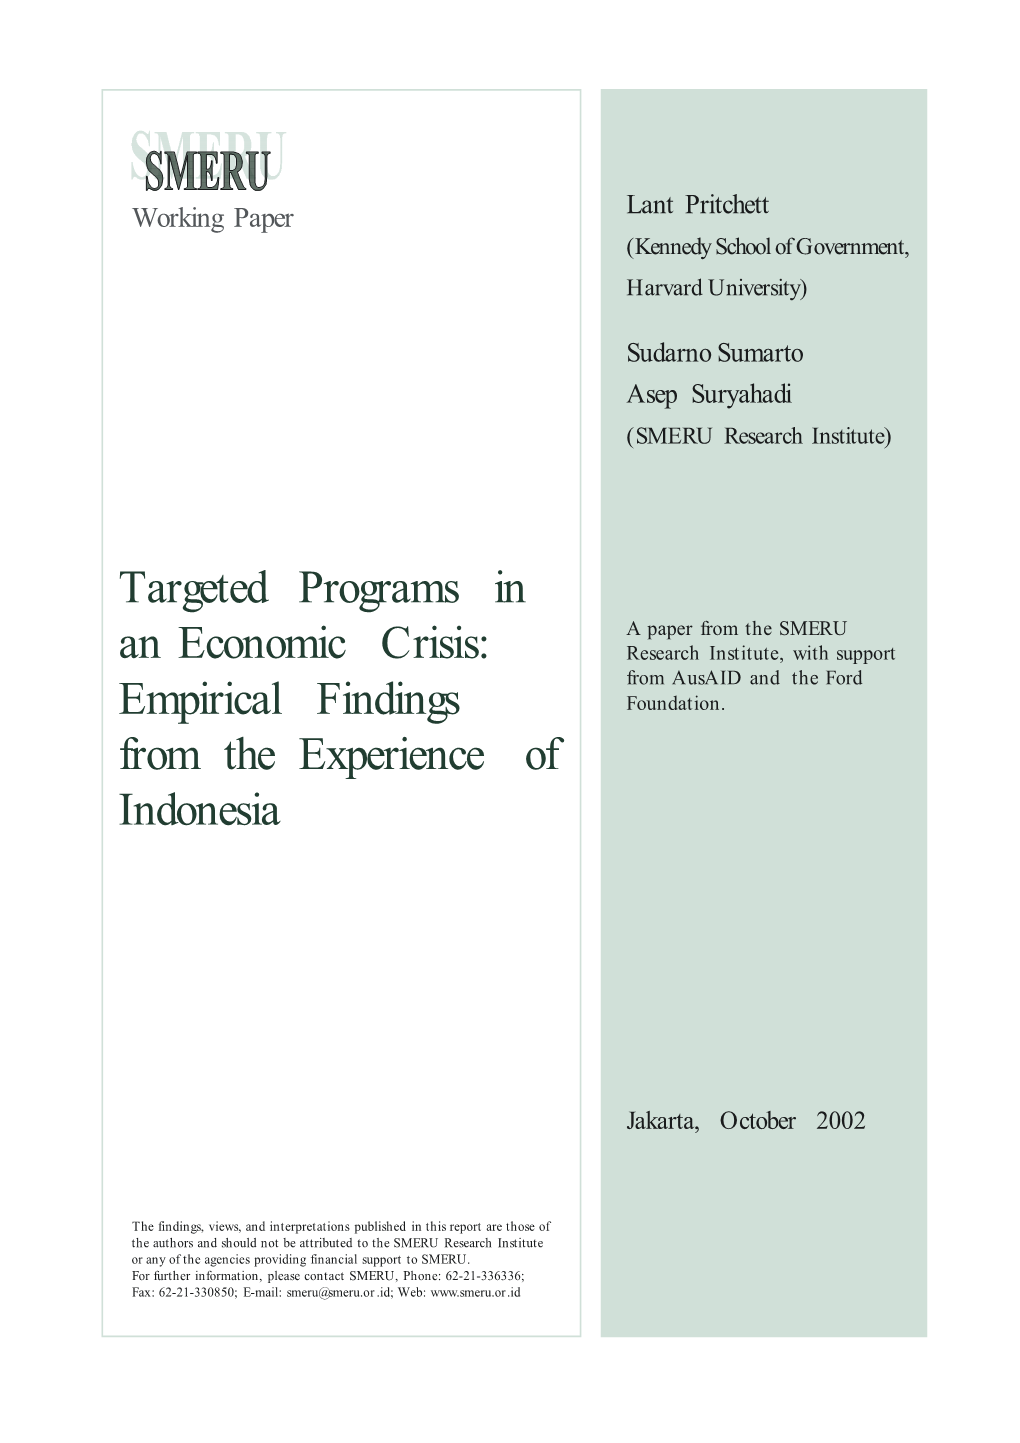 Targeted Programs in an Economic Crisis: Empirical Findings from the Experience of Indonesia